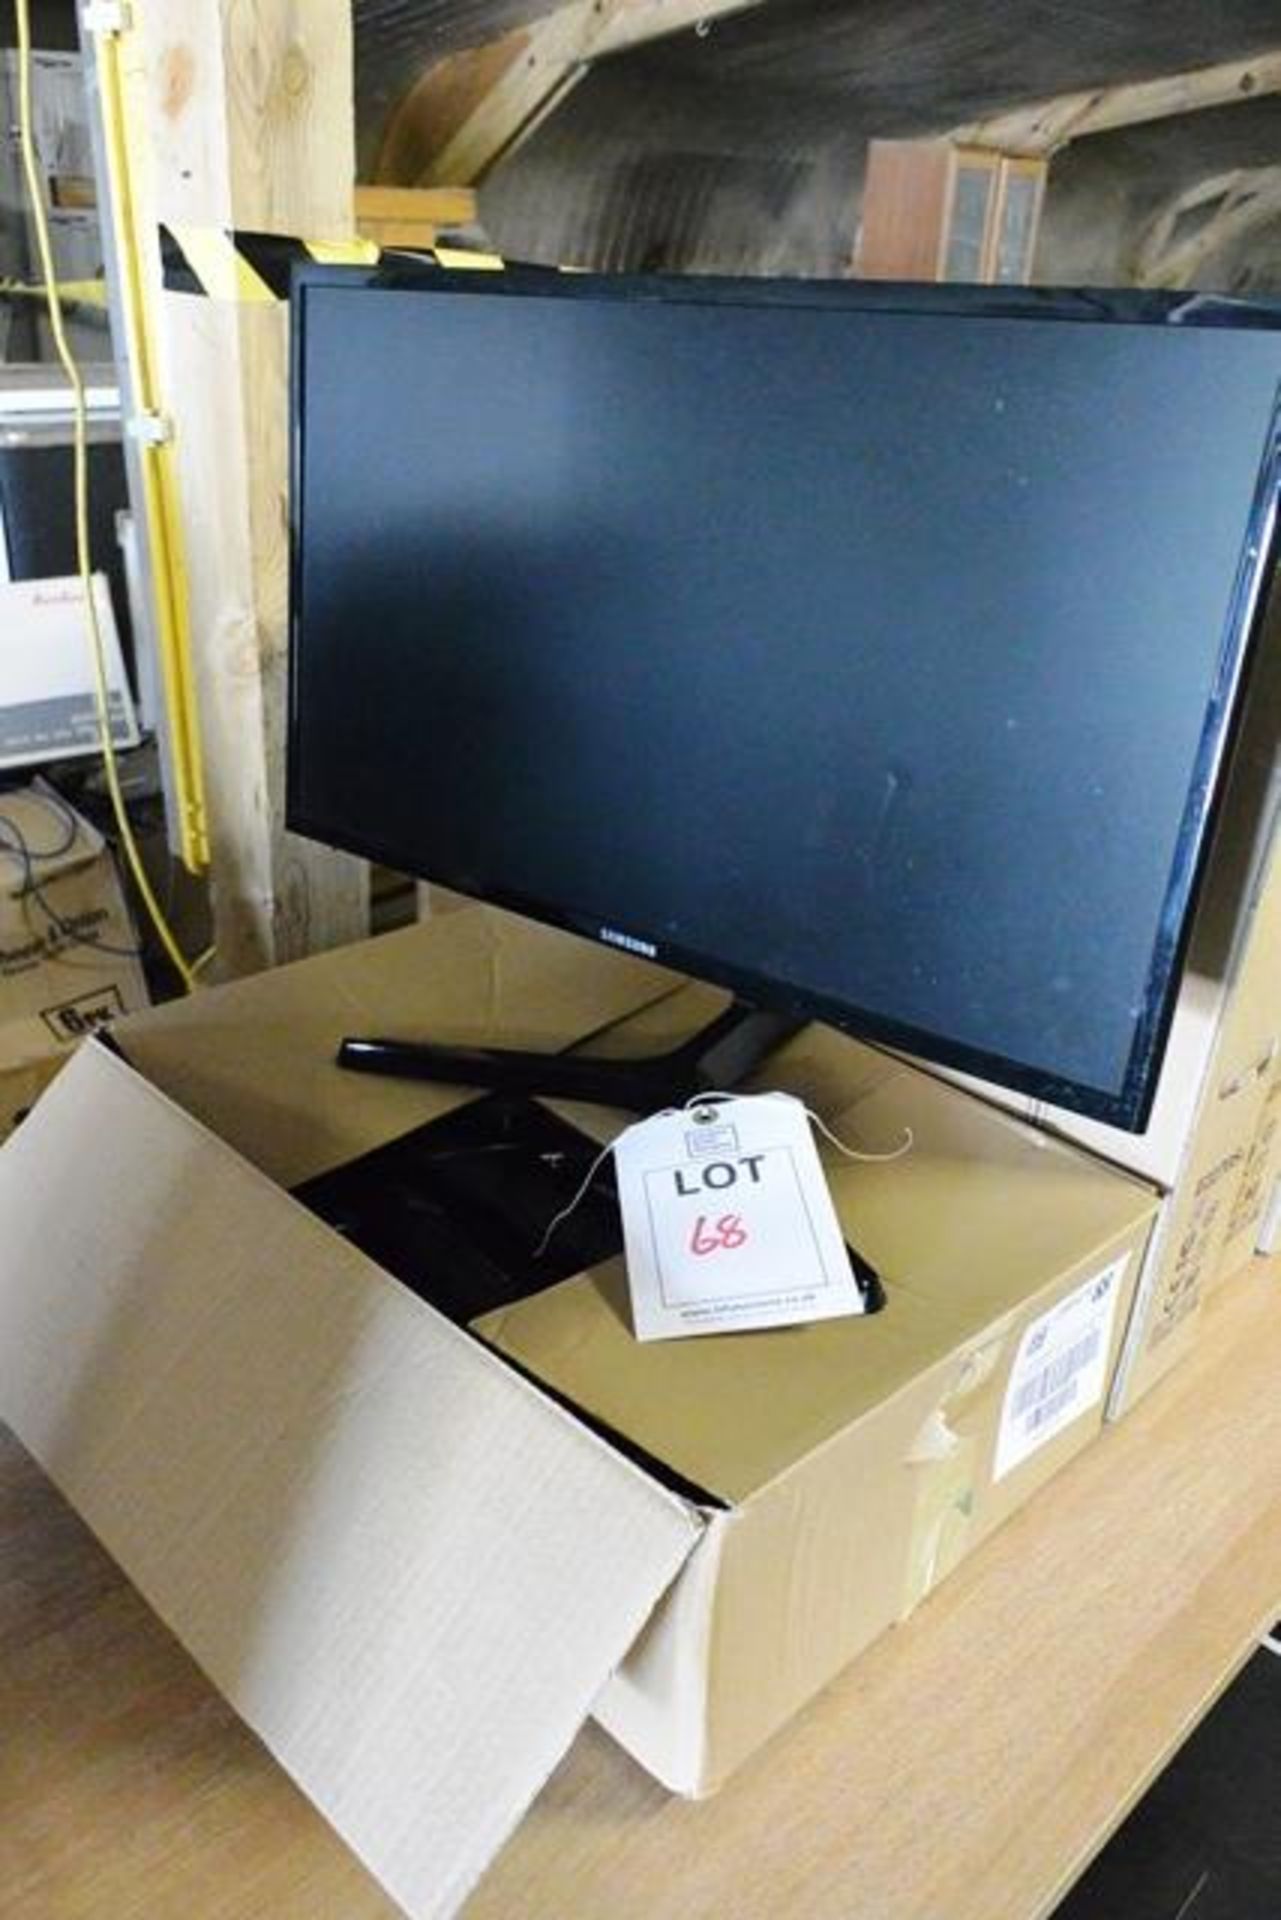 Samsung LCD monitor and assorted keyboards